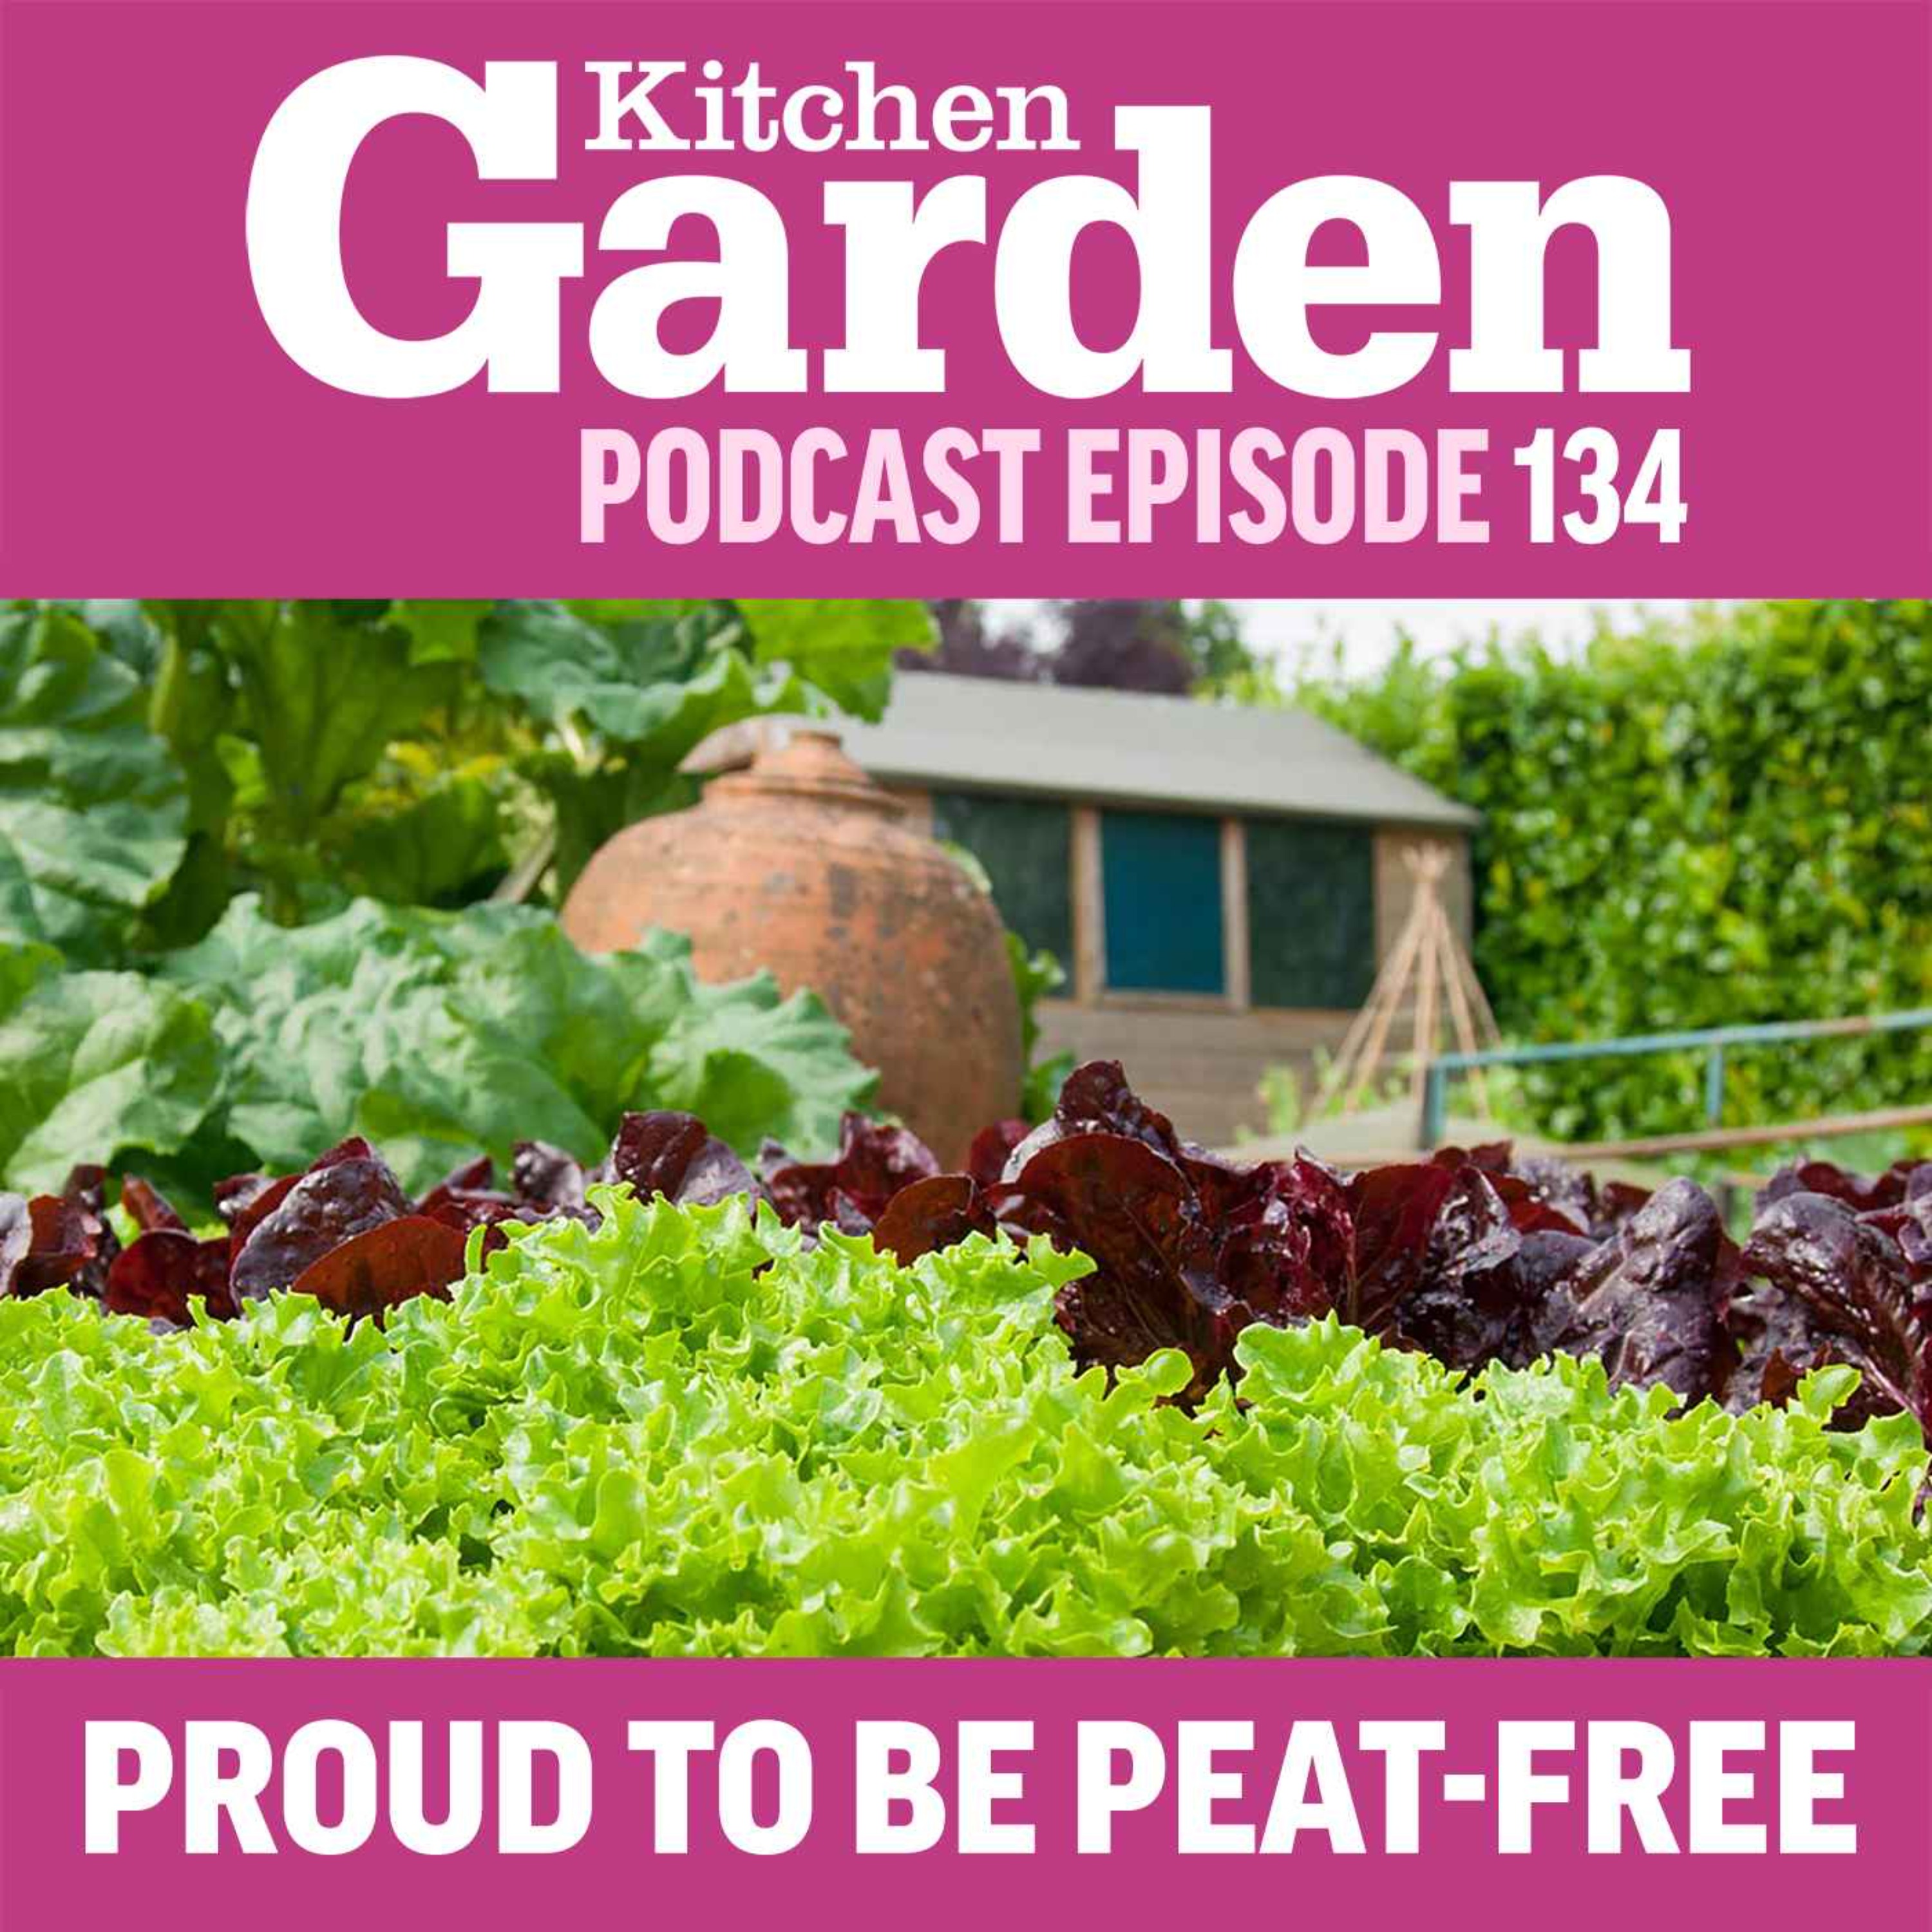 134 - Barnsdale Gardens, proud to be peat-free